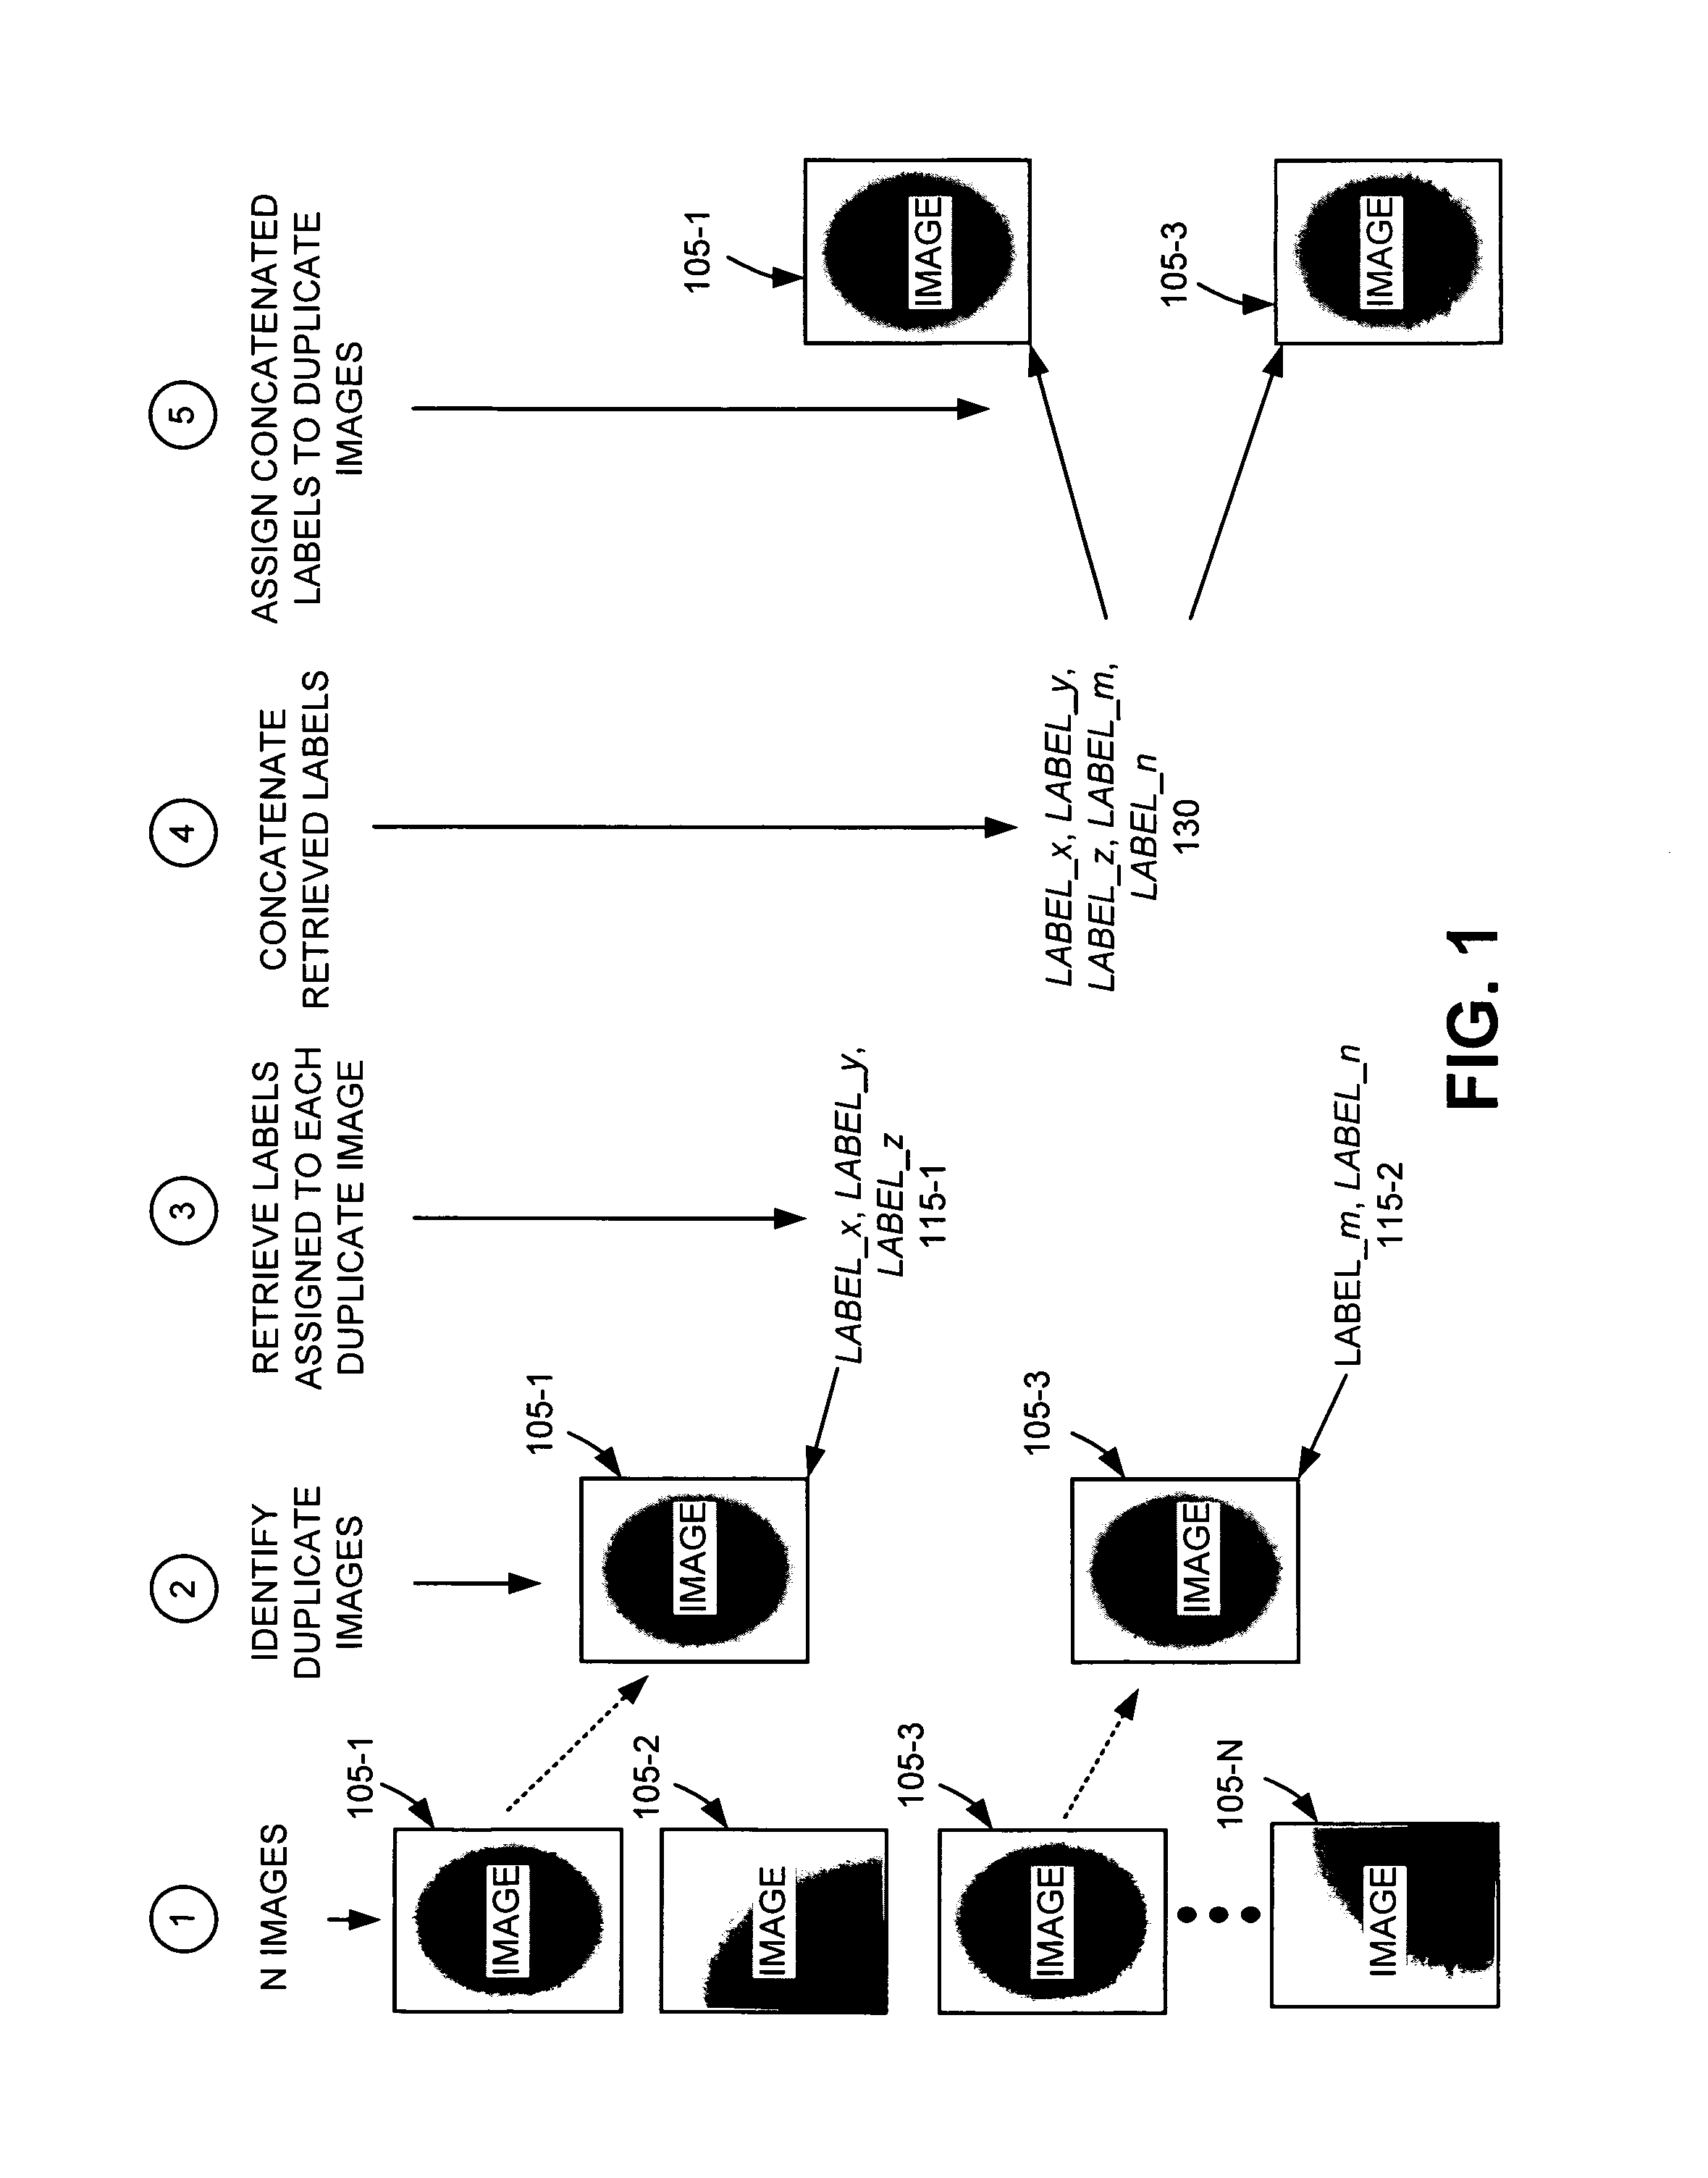 Systems and methods for using image duplicates to assign labels to images